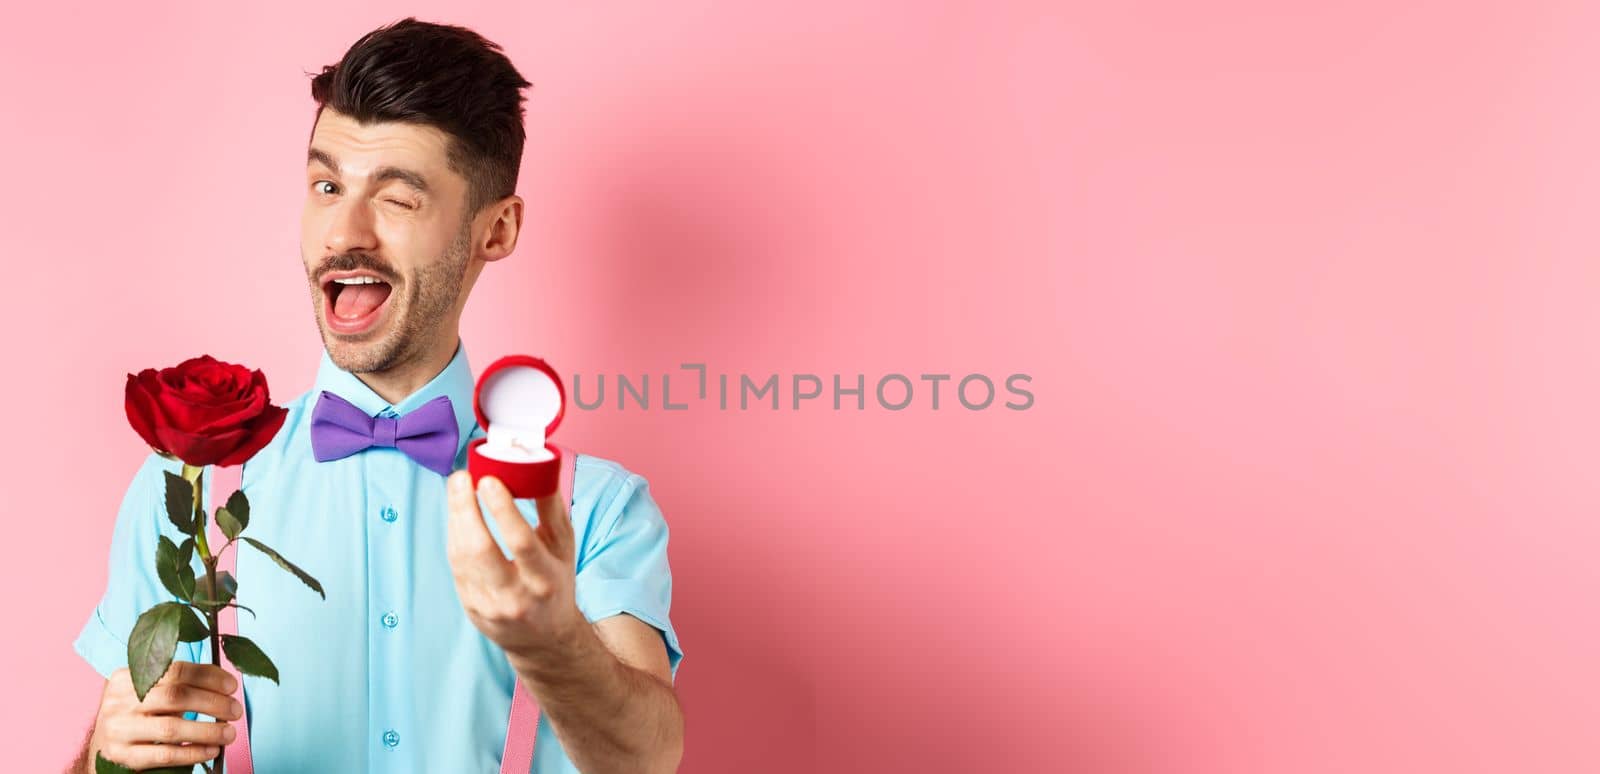 Valentines day. Funny guy making proposal, winking and saying marry me, showing engagement ring with red rose, standing over pink background.